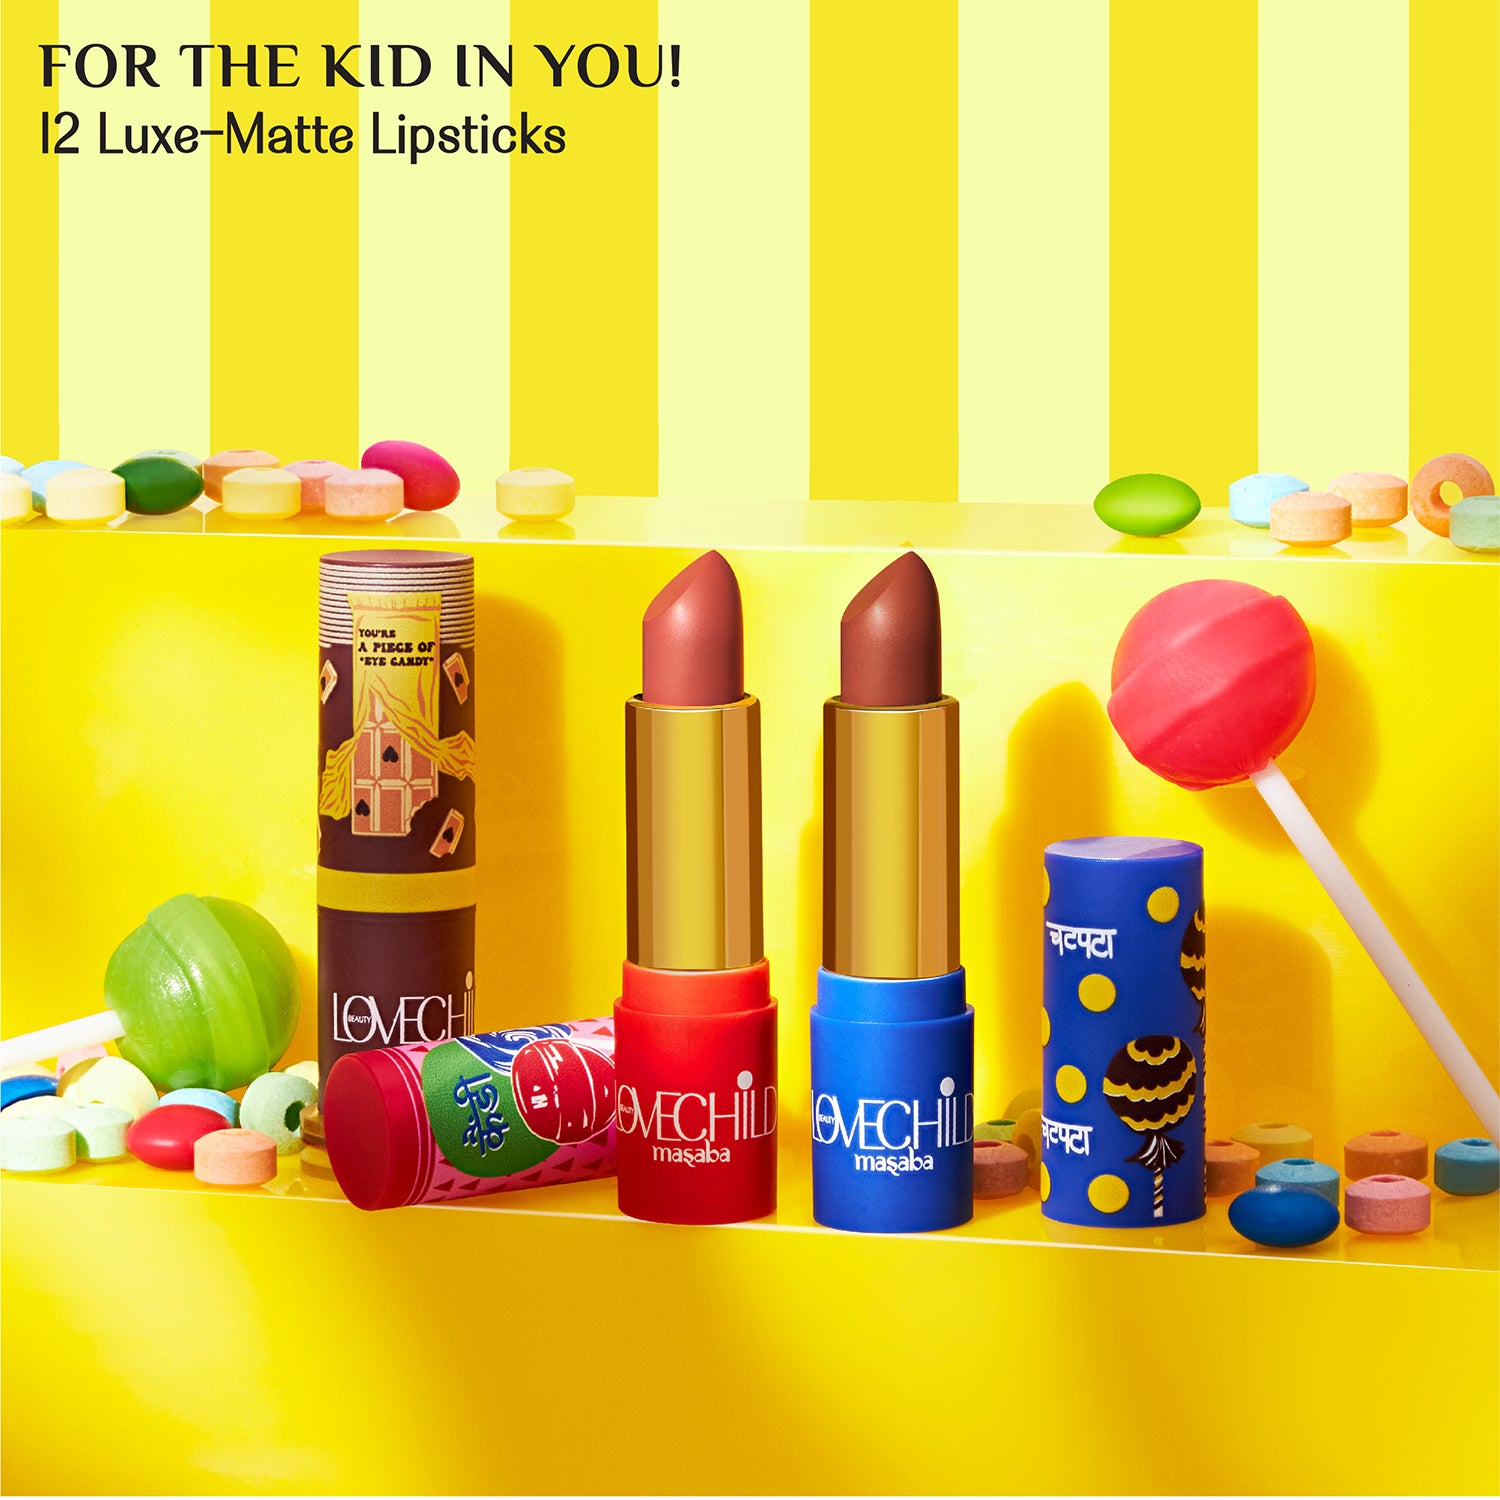 LoveChild Masaba - For the Kid in You! - 01 Eye-candy - Luxe Matte Lipstick